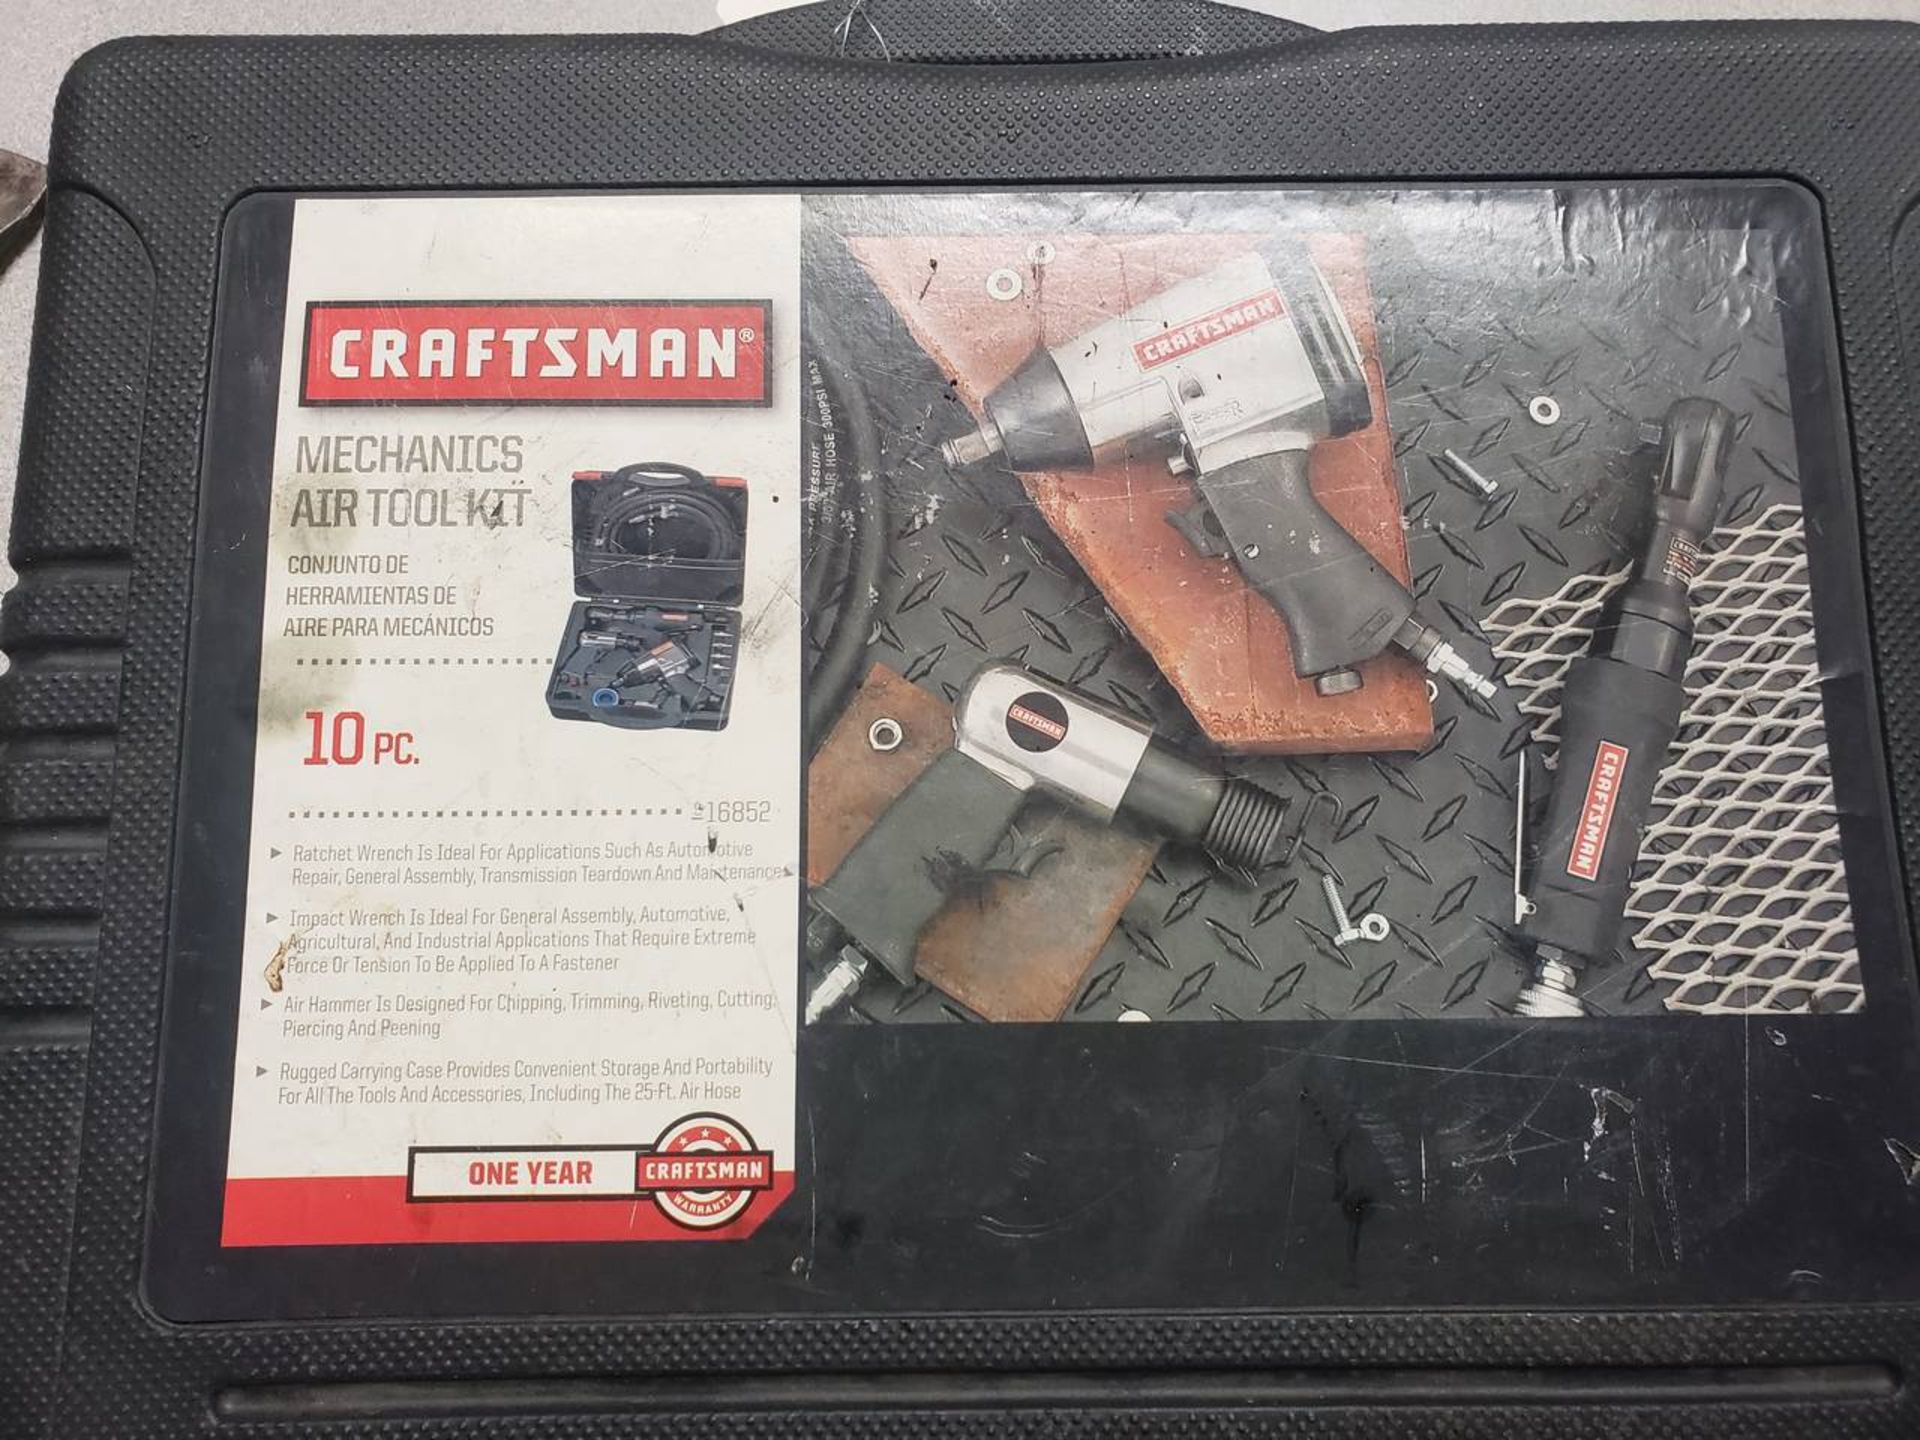 Craftsman Cambell Hausfeld Husky 1005 H4630 Mechanics 10pc. Air Tool Kit (Complete New in Case), - Image 2 of 7